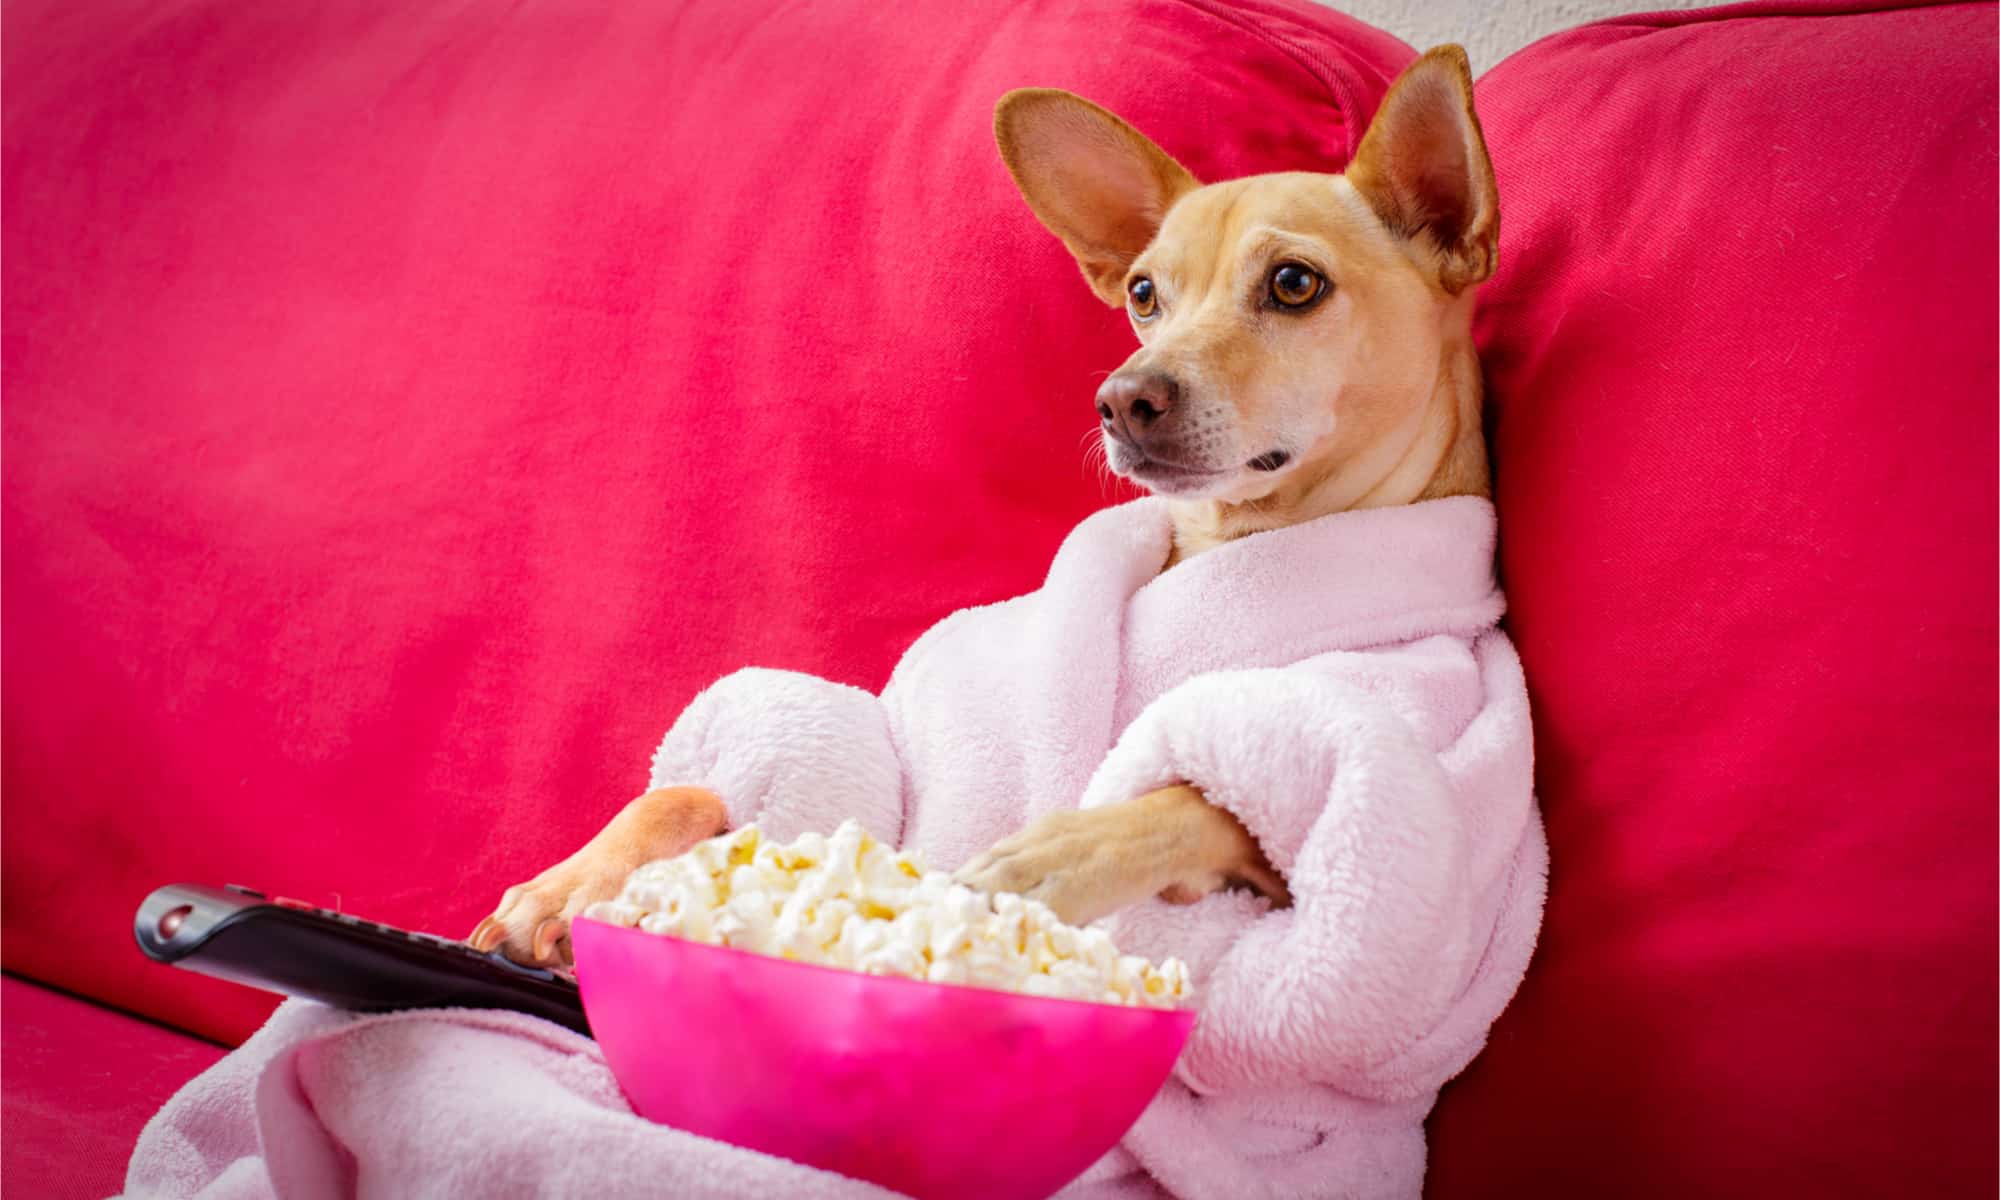 A dog in a robe enjoying popcorn on a couch.